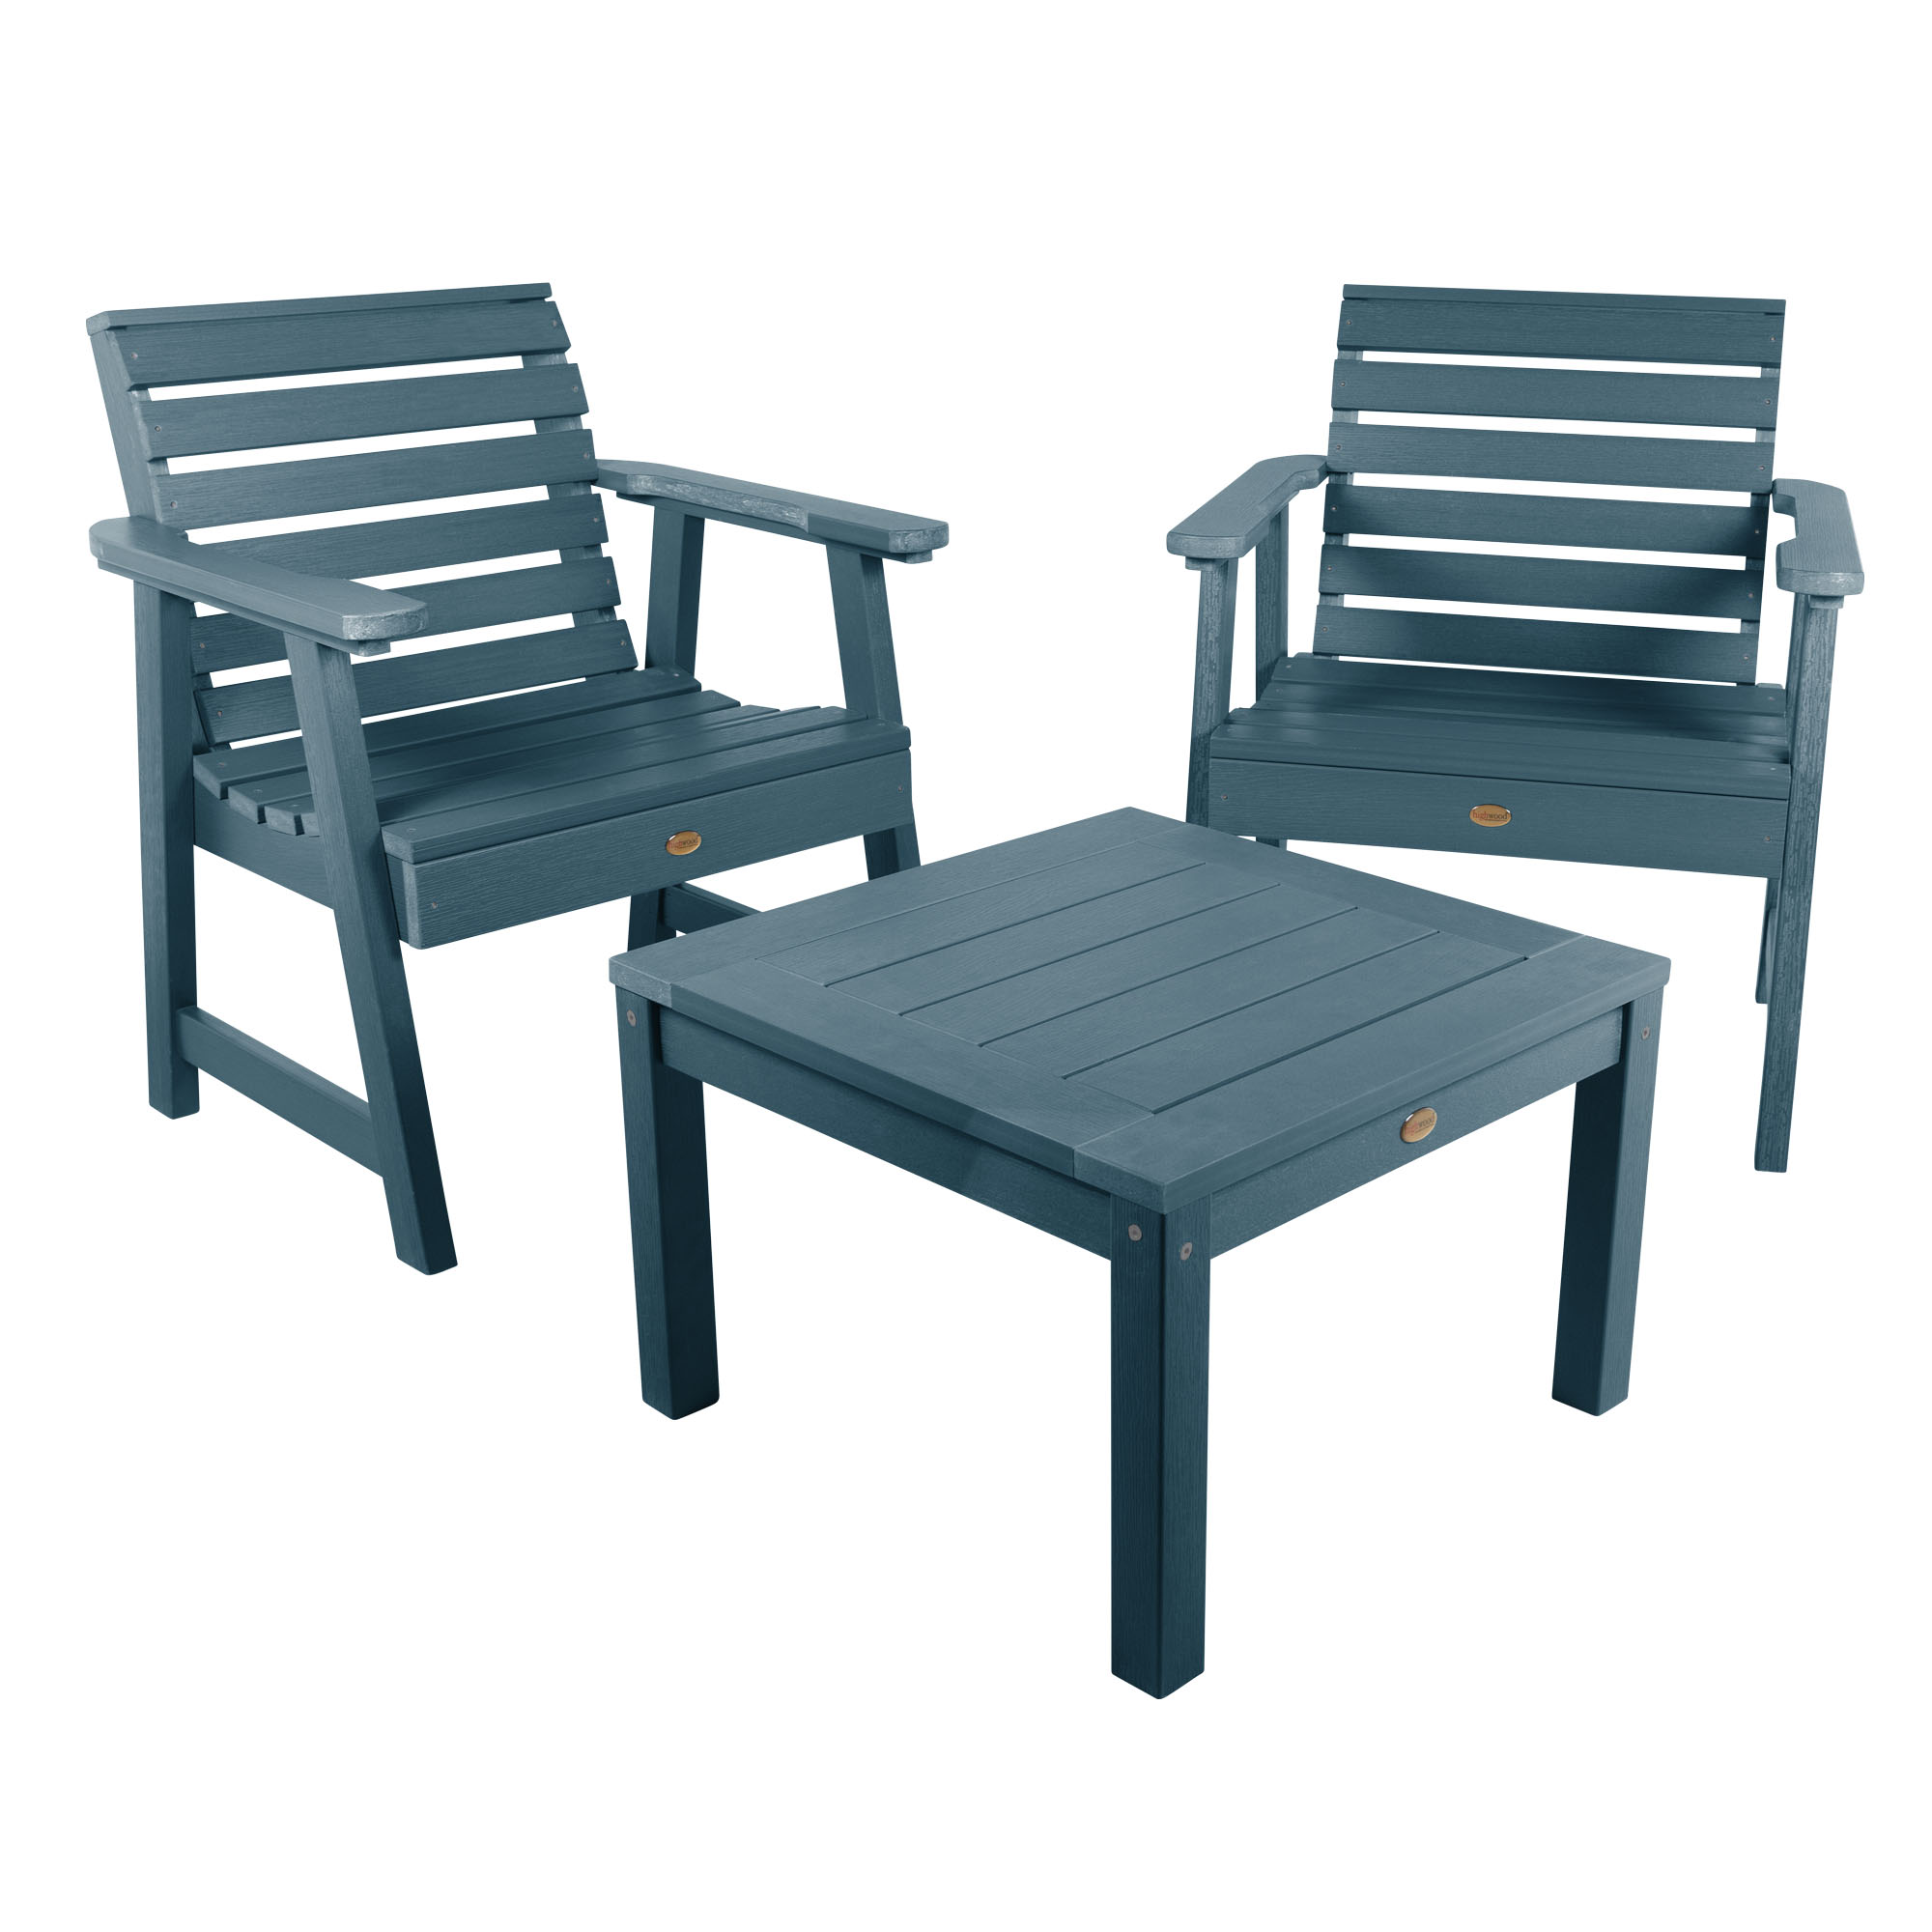 Highwood 3pc Weatherly Garden Chair Set with 1 Adirondack Square Side Table - image 1 of 6